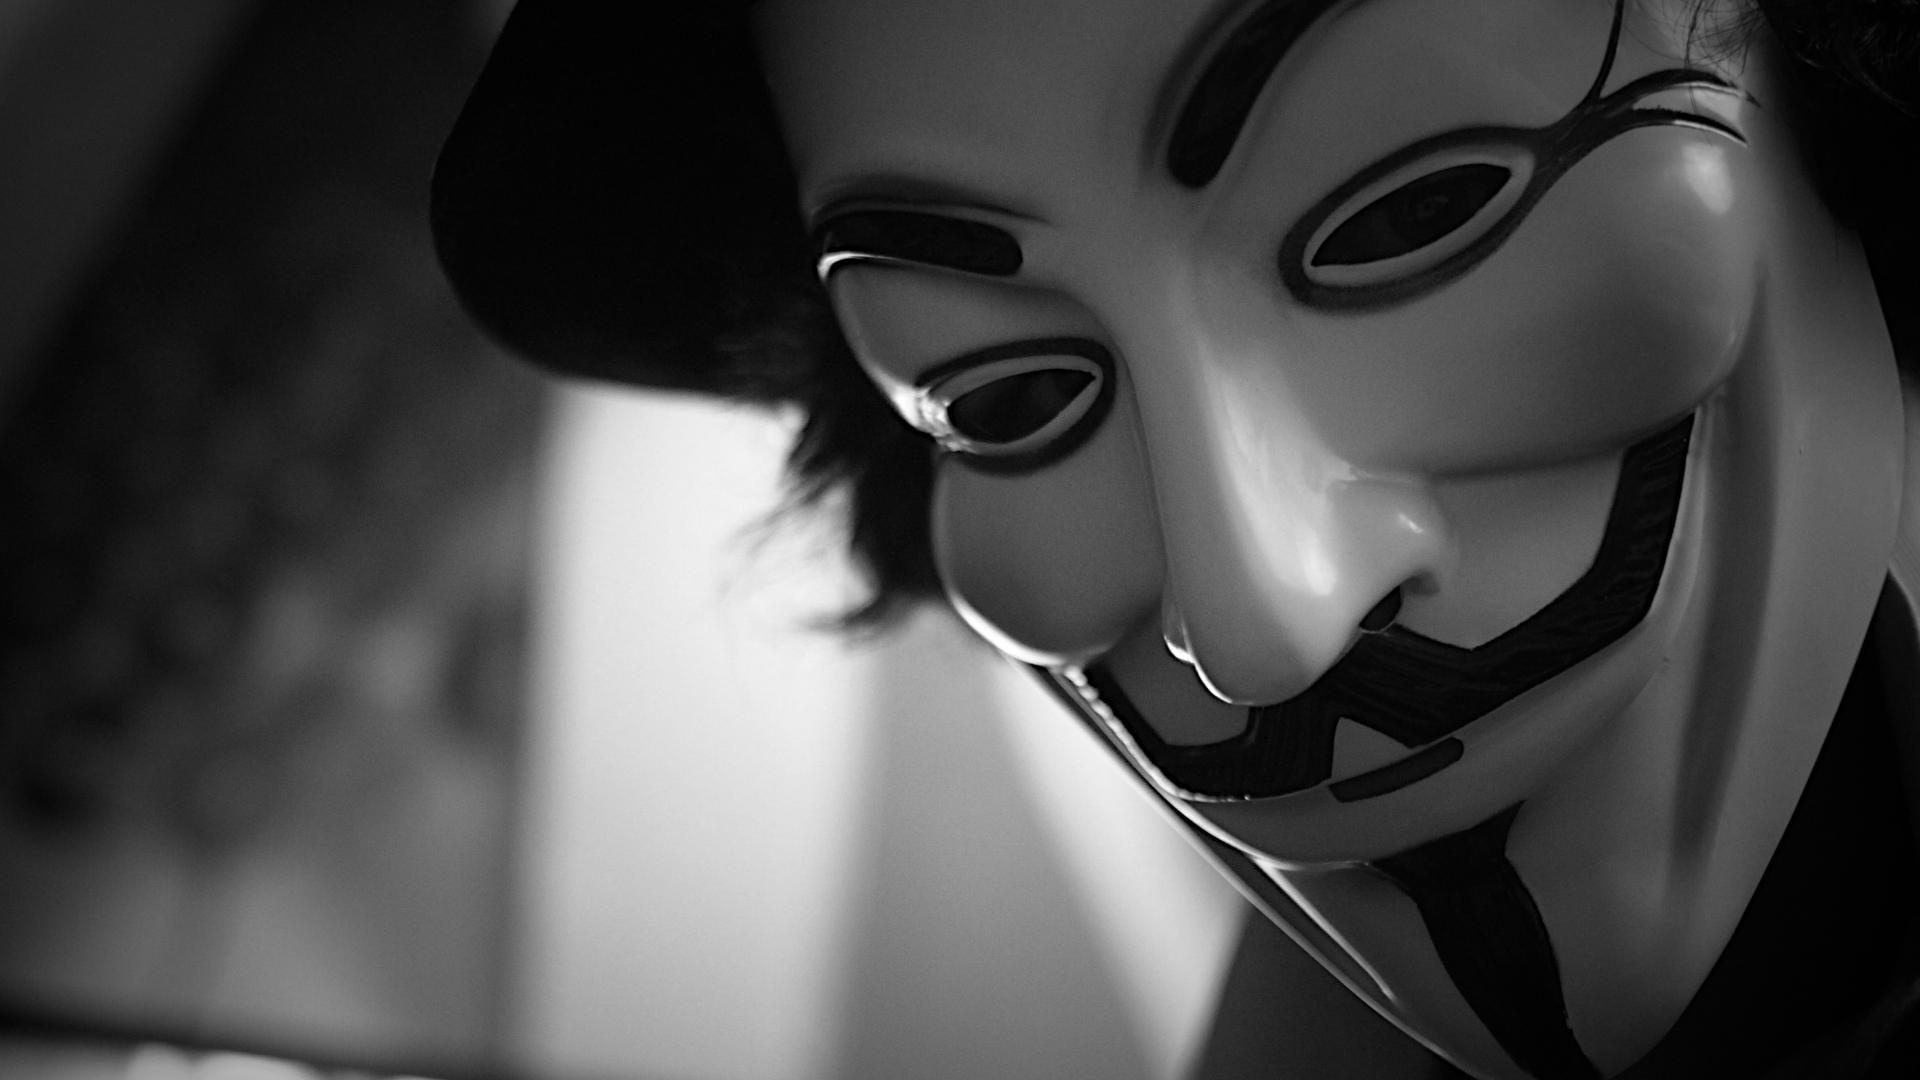 Guy Fawkes Mask: Became associated with the Project Chanology protests against the Church of Scientology. 1920x1080 Full HD Background.